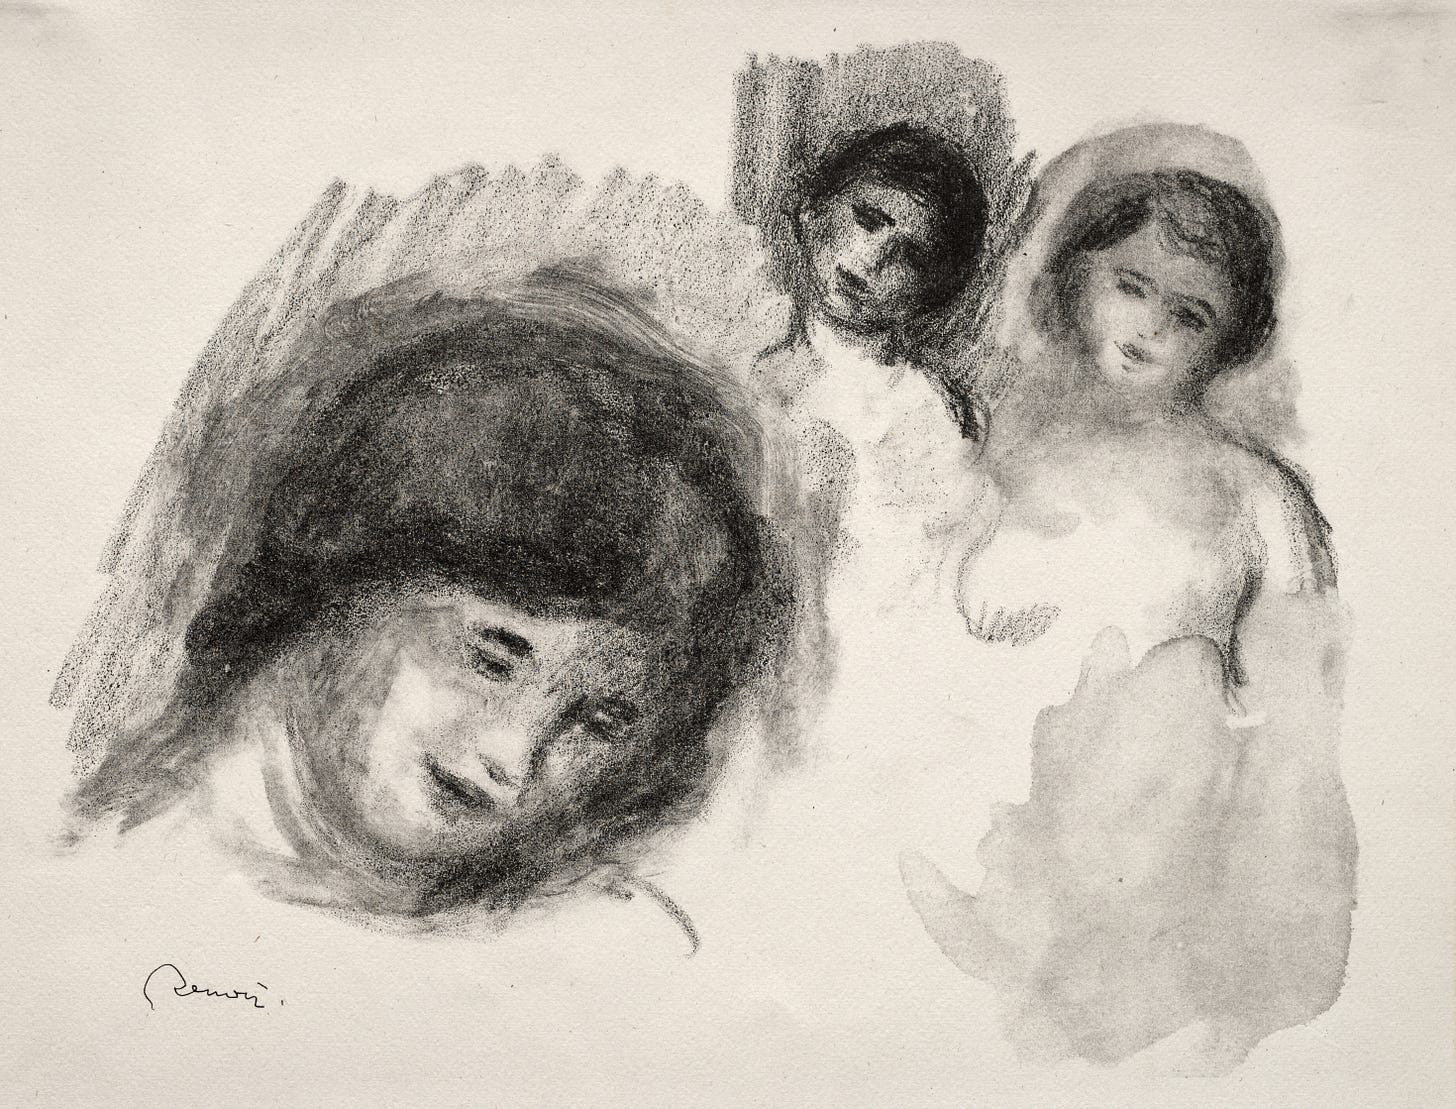 Stone with Three Sketches (1904) by Pierre-Auguste Renoir